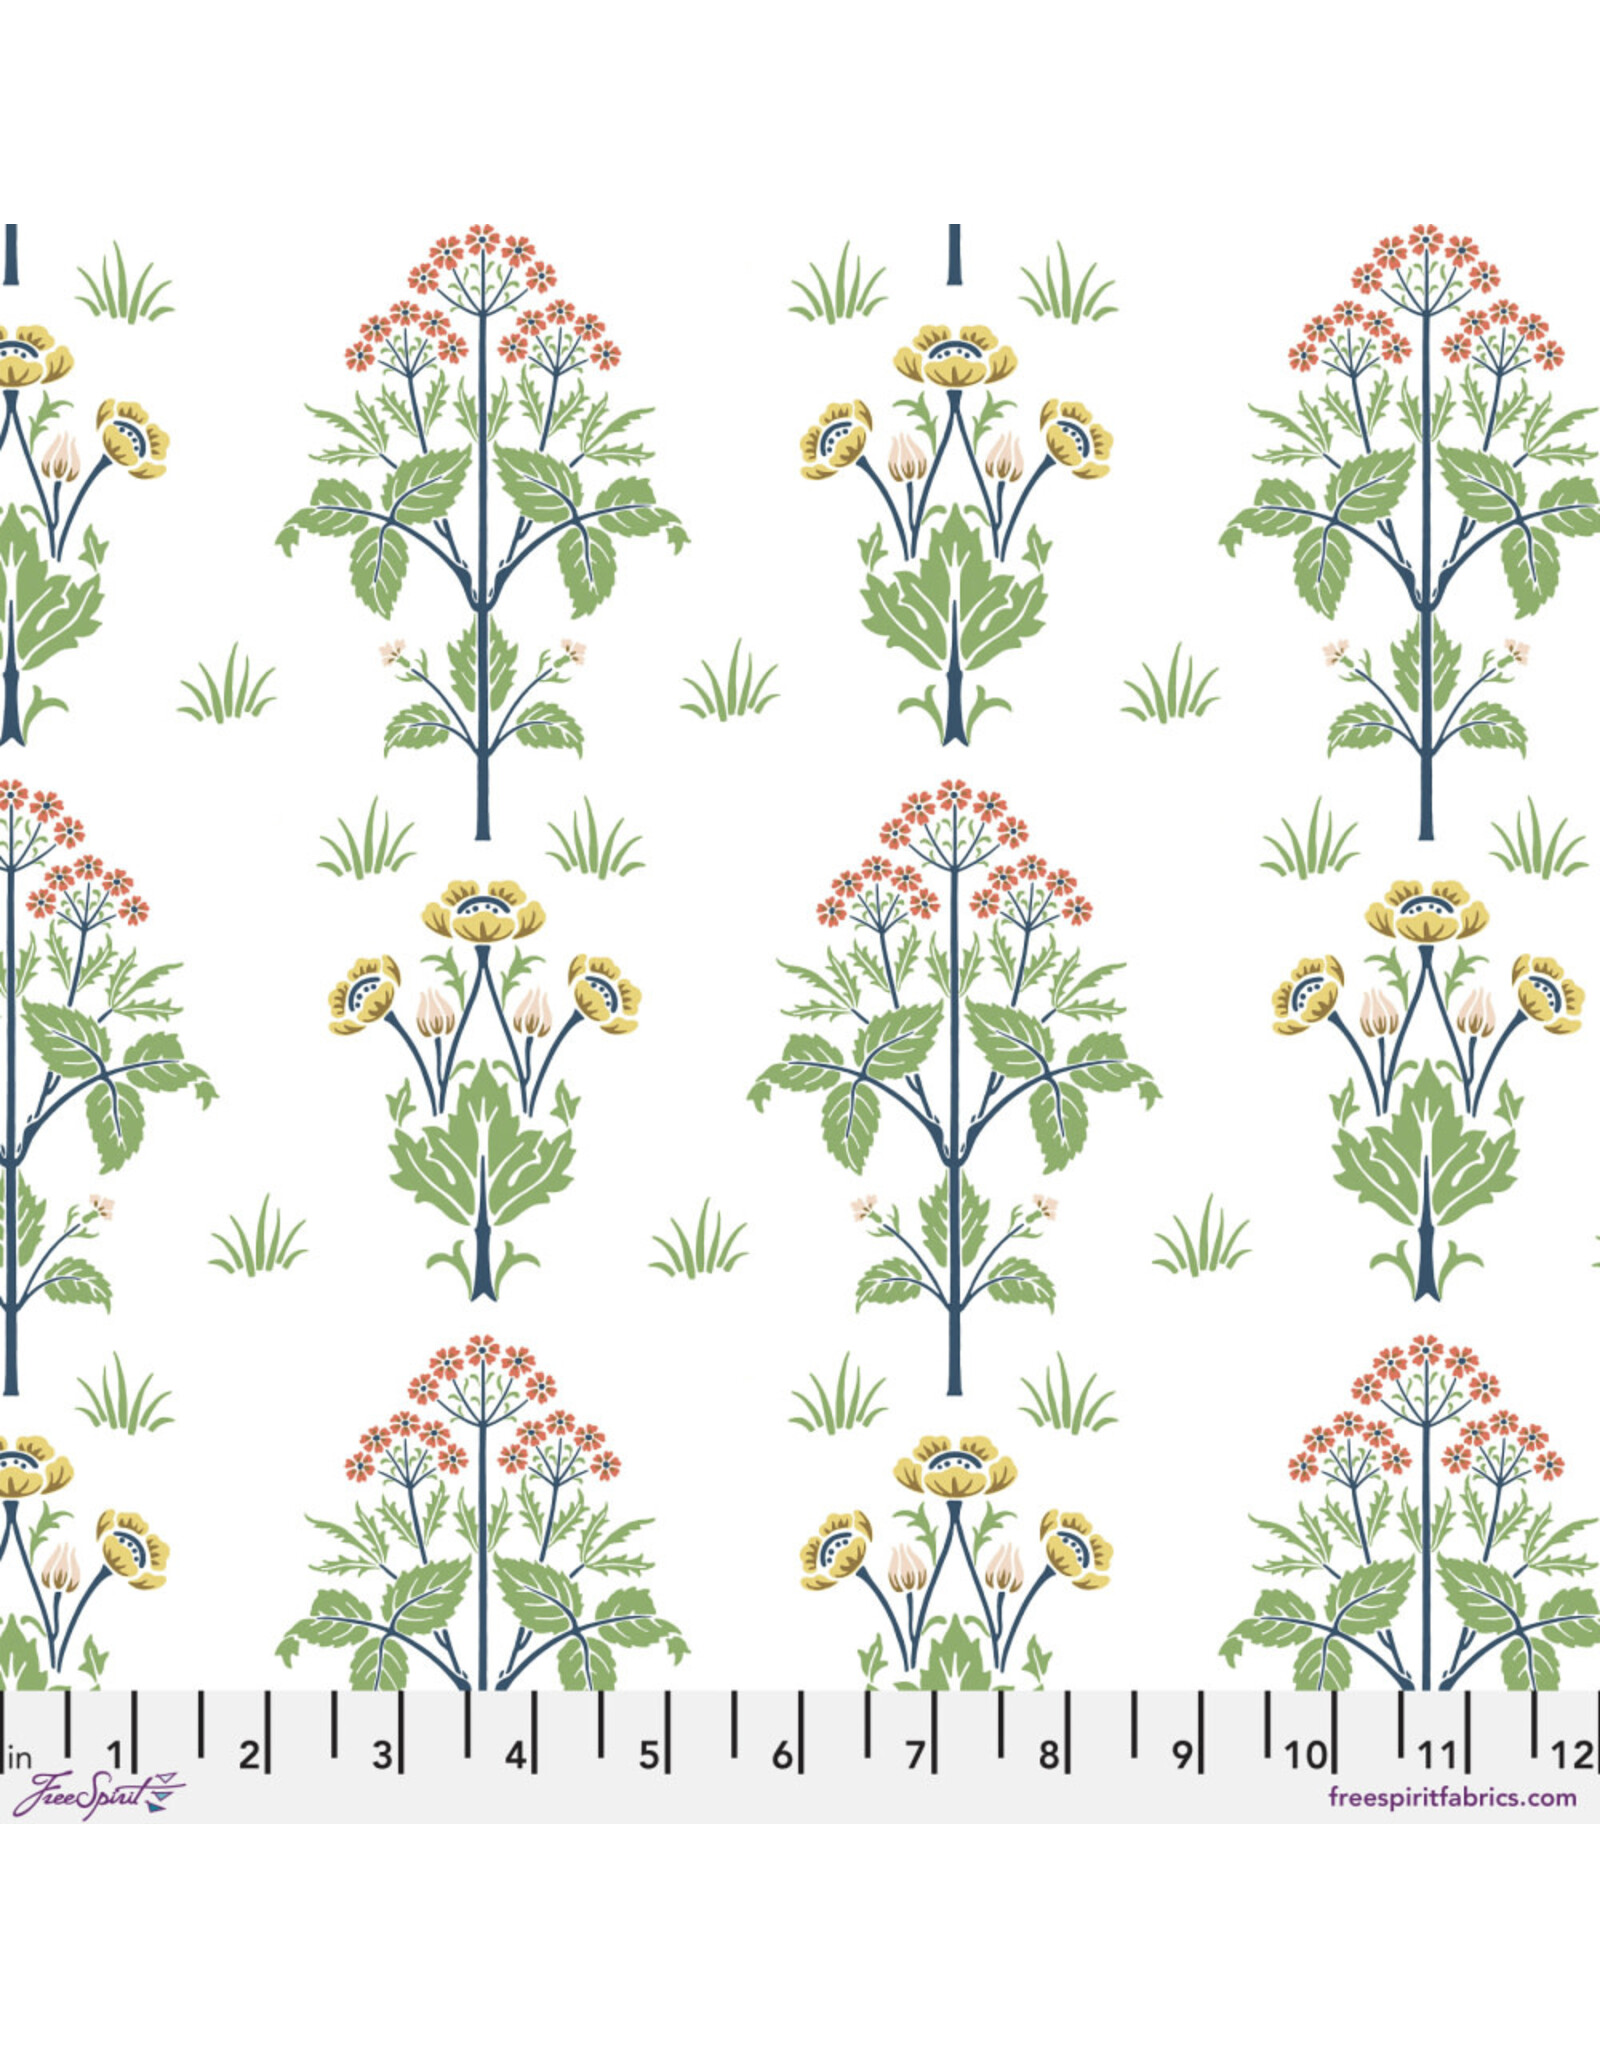 William Morris & Co. Morris & Co, Leicester, Meadowsweet in White, Fabric Half-Yards